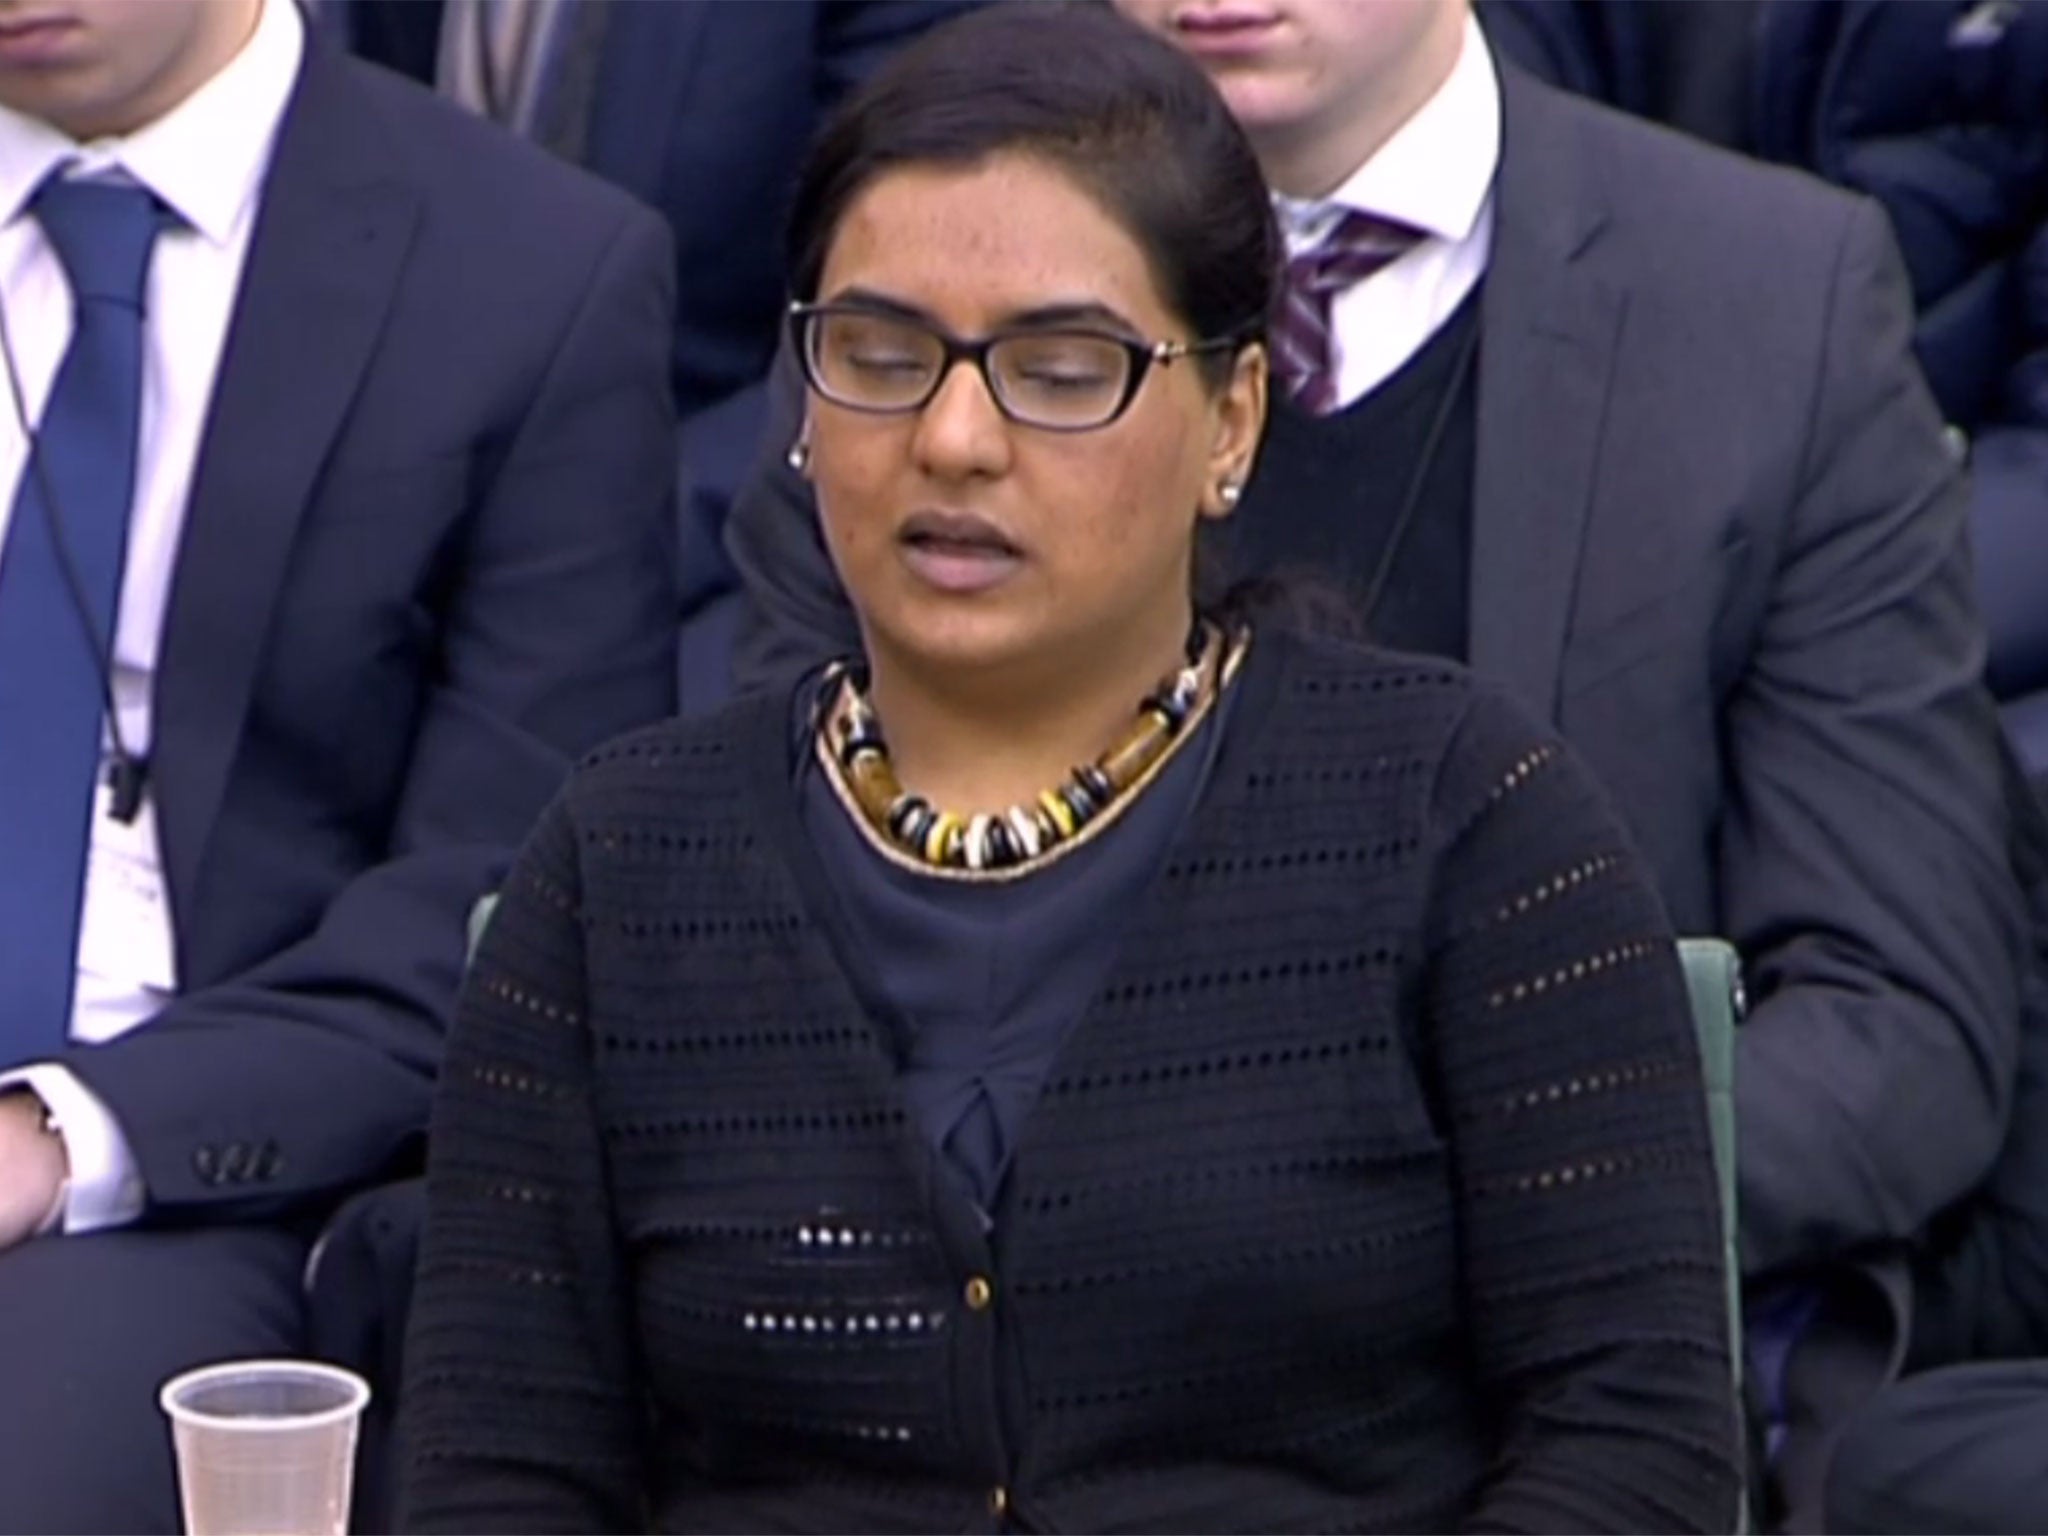 Konika Dhar asked MPs: 'Is there anything I can do to help my brother?'